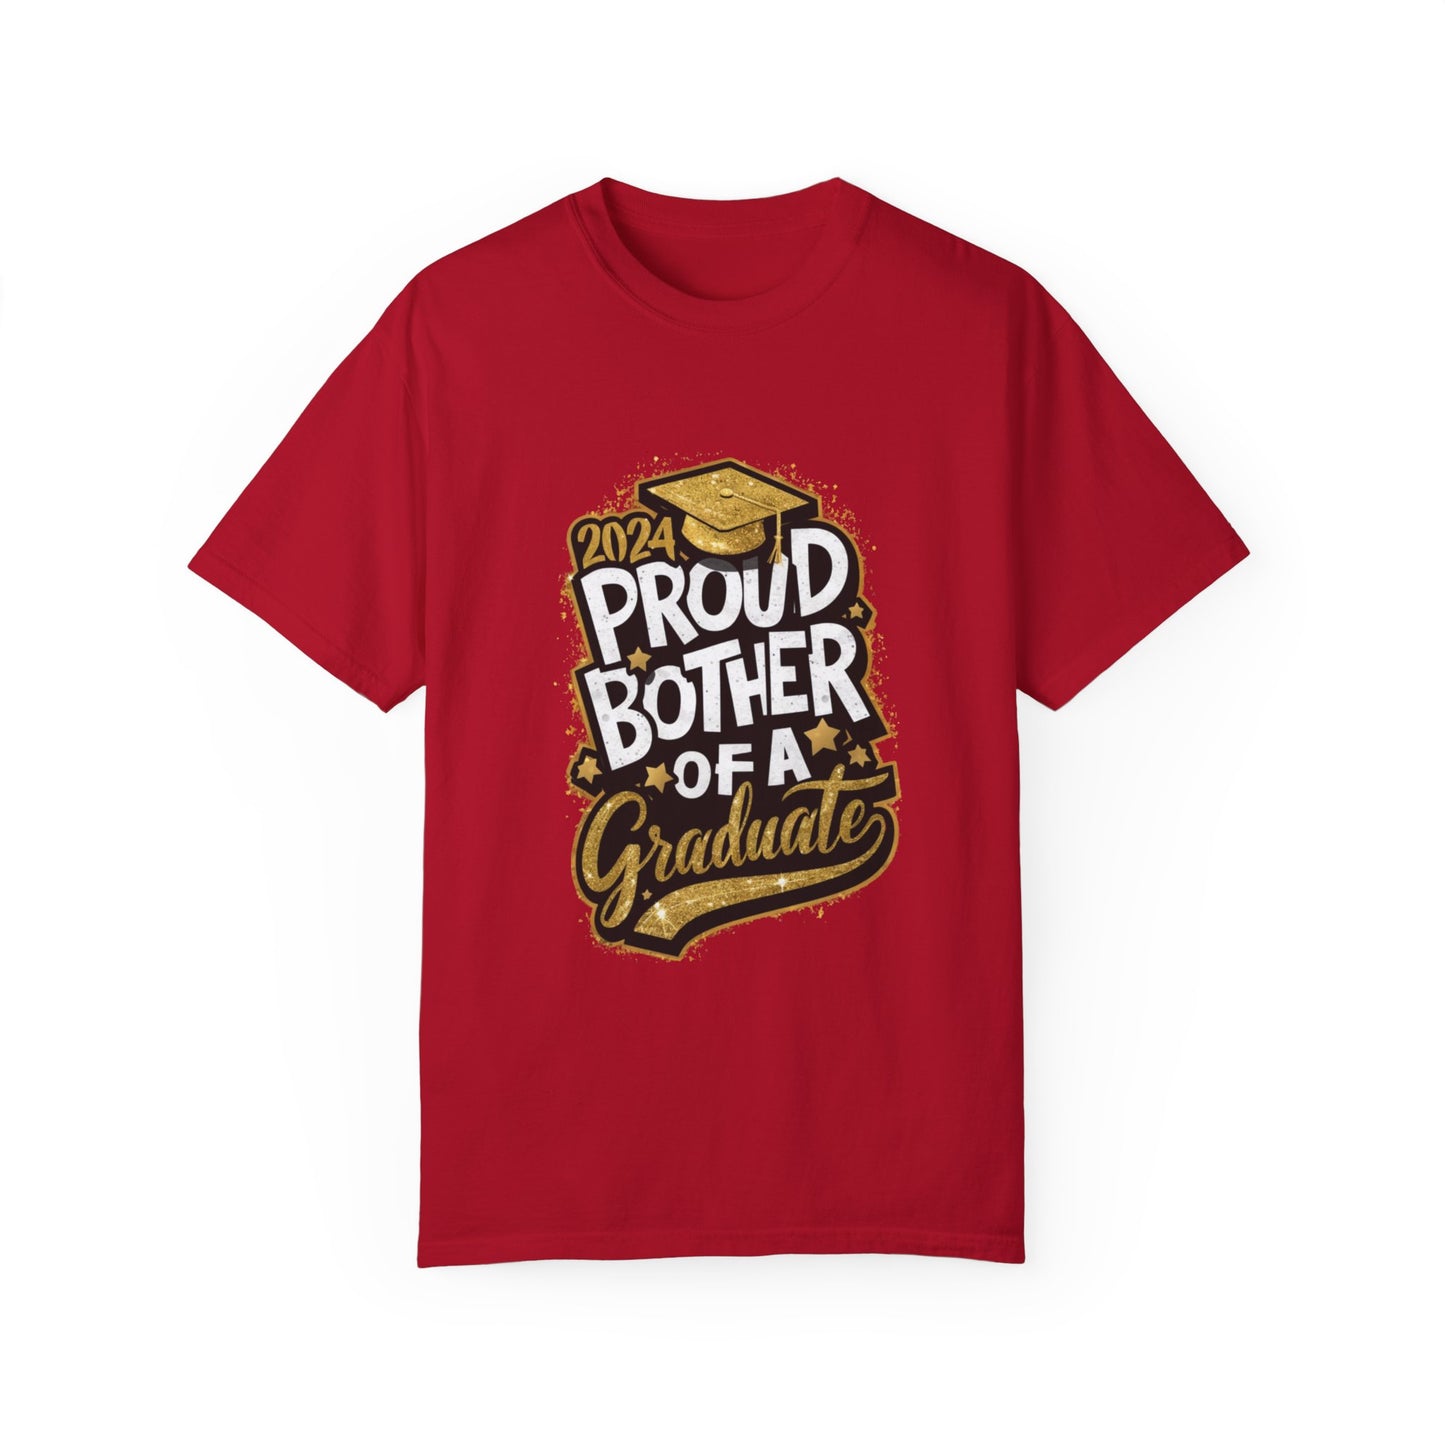 Proud Brother of a 2024 Graduate Unisex Garment-dyed T-shirt Cotton Funny Humorous Graphic Soft Premium Unisex Men Women Red T-shirt Birthday Gift-2